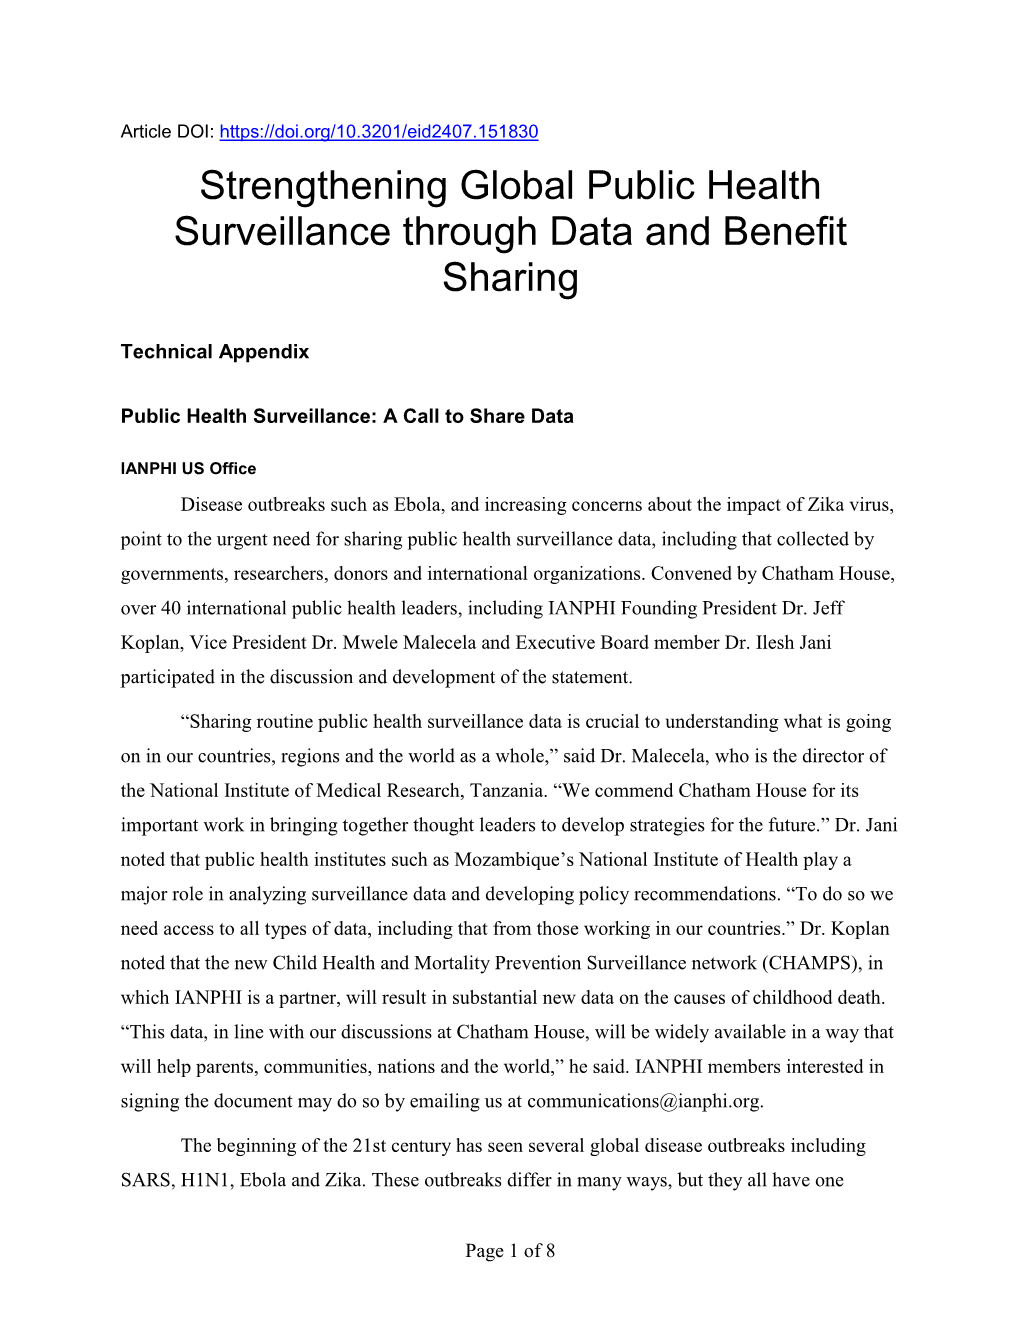 Strengthening Global Public Health Surveillance Through Data and Benefit Sharing